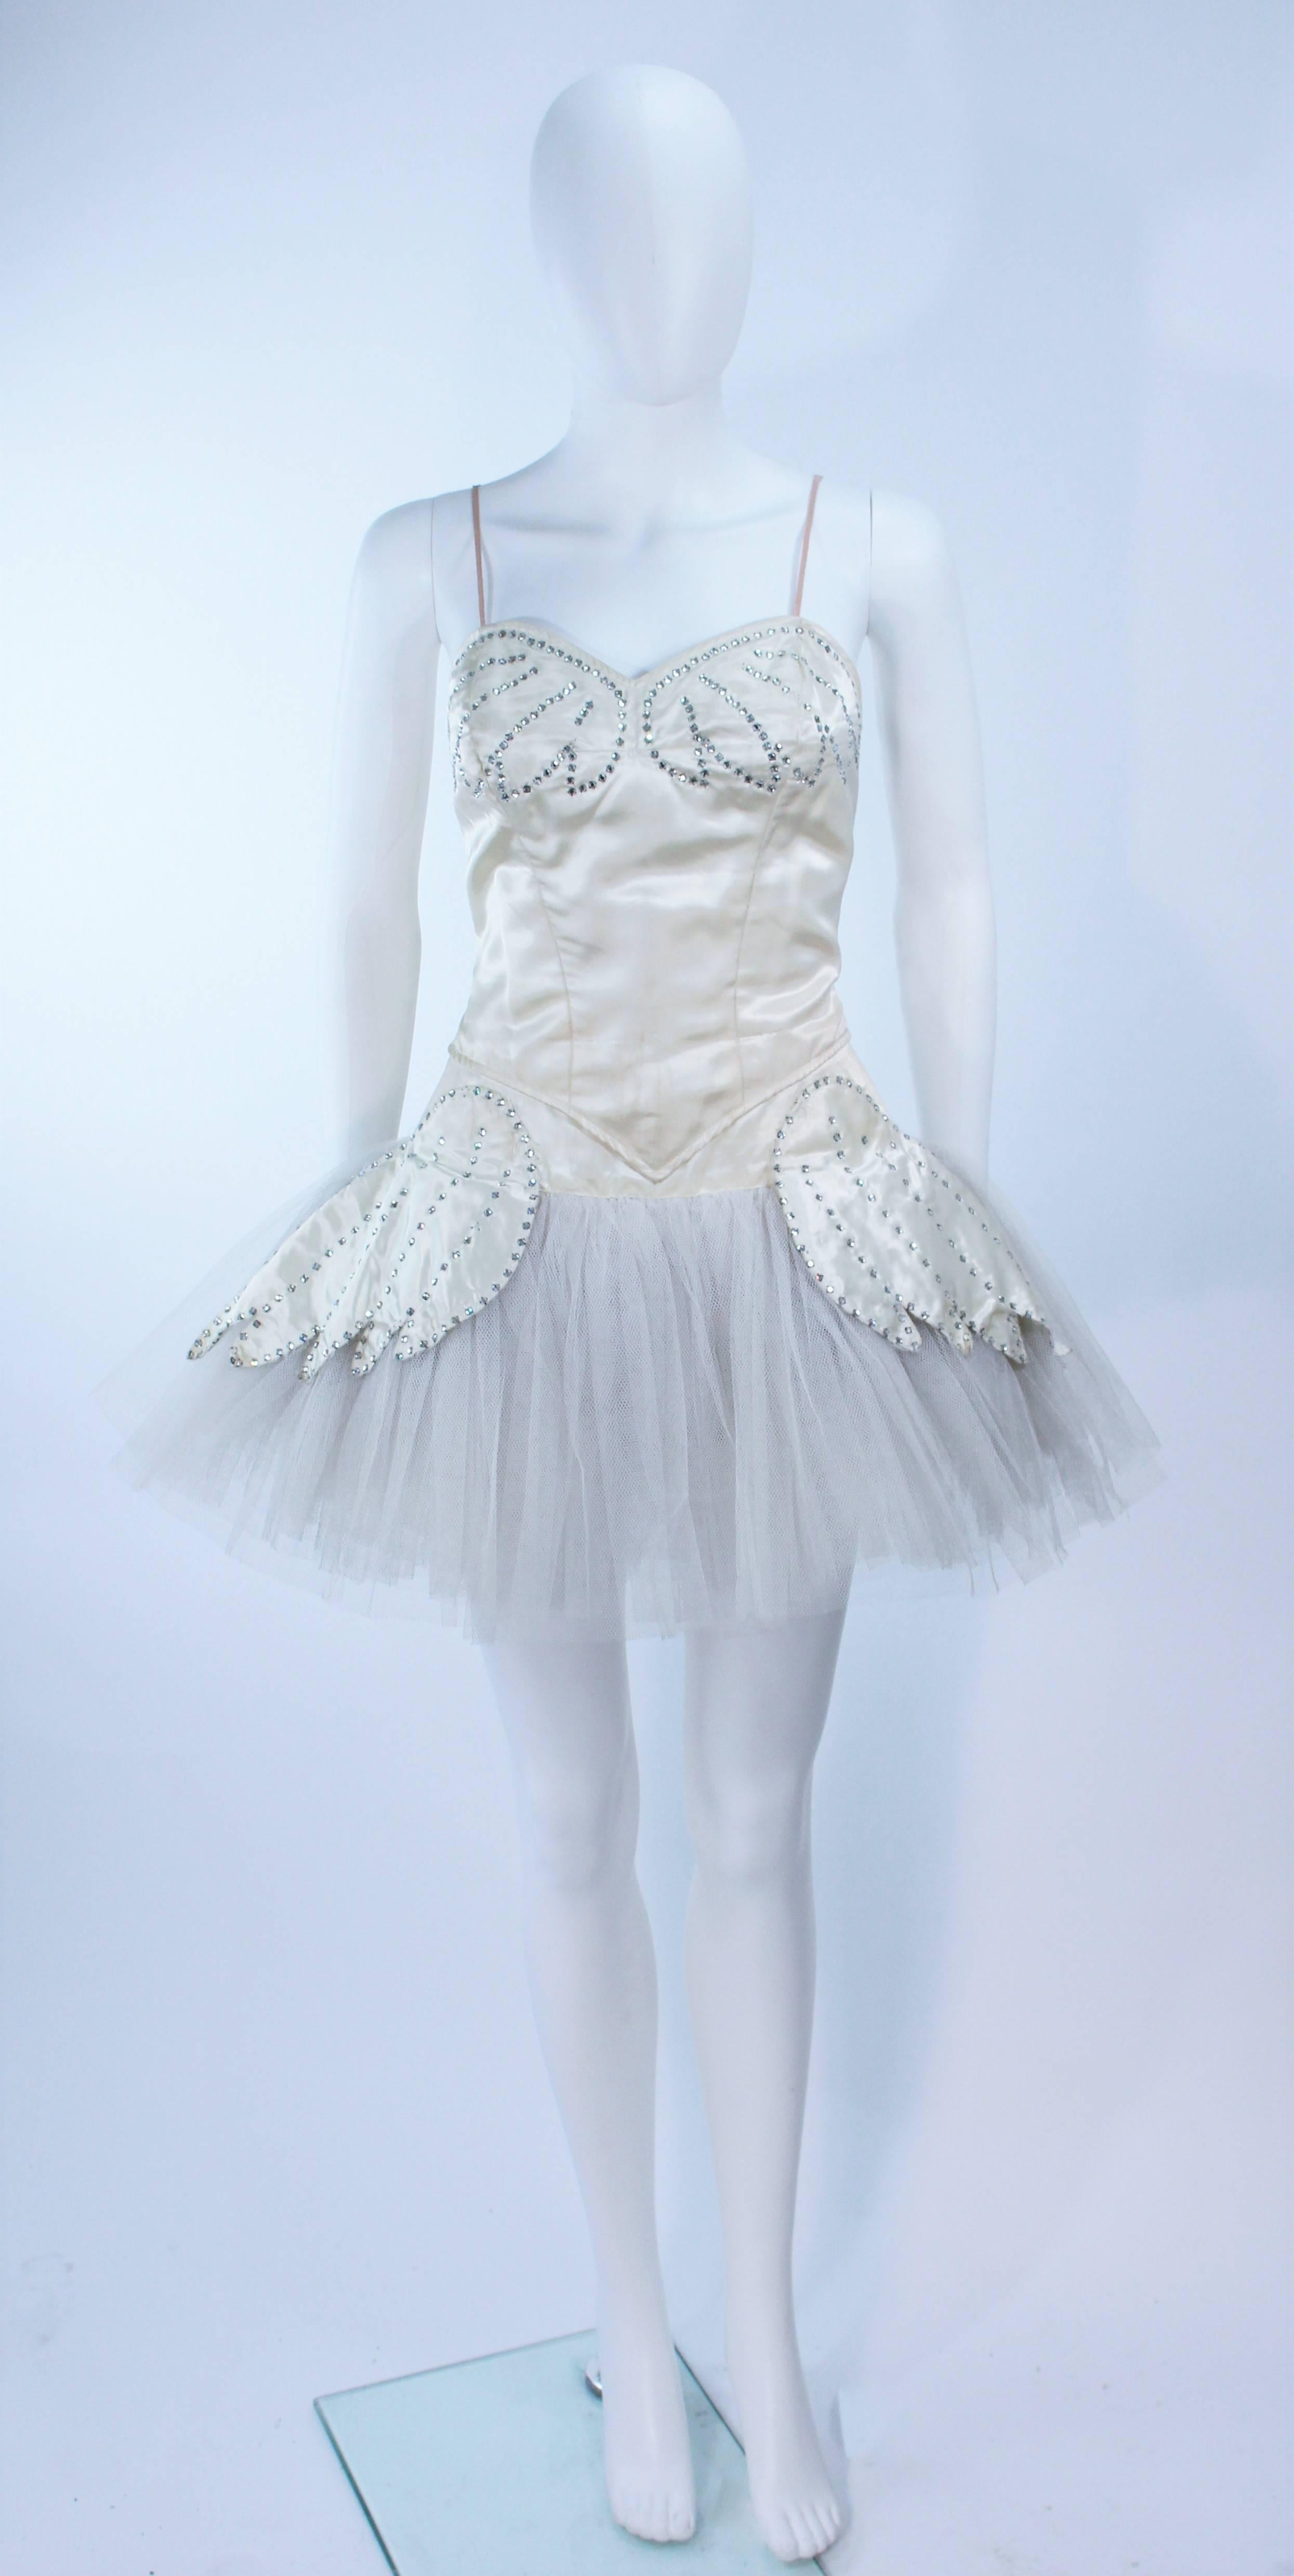  This Tutu is composed of a ivory hued satin with rhinestone applique and tulle skirt. Features a crotch interior and hook and eye closure. In good vintage condition. Some missing rhinestones (There are signs of wear dues to age and could use dry